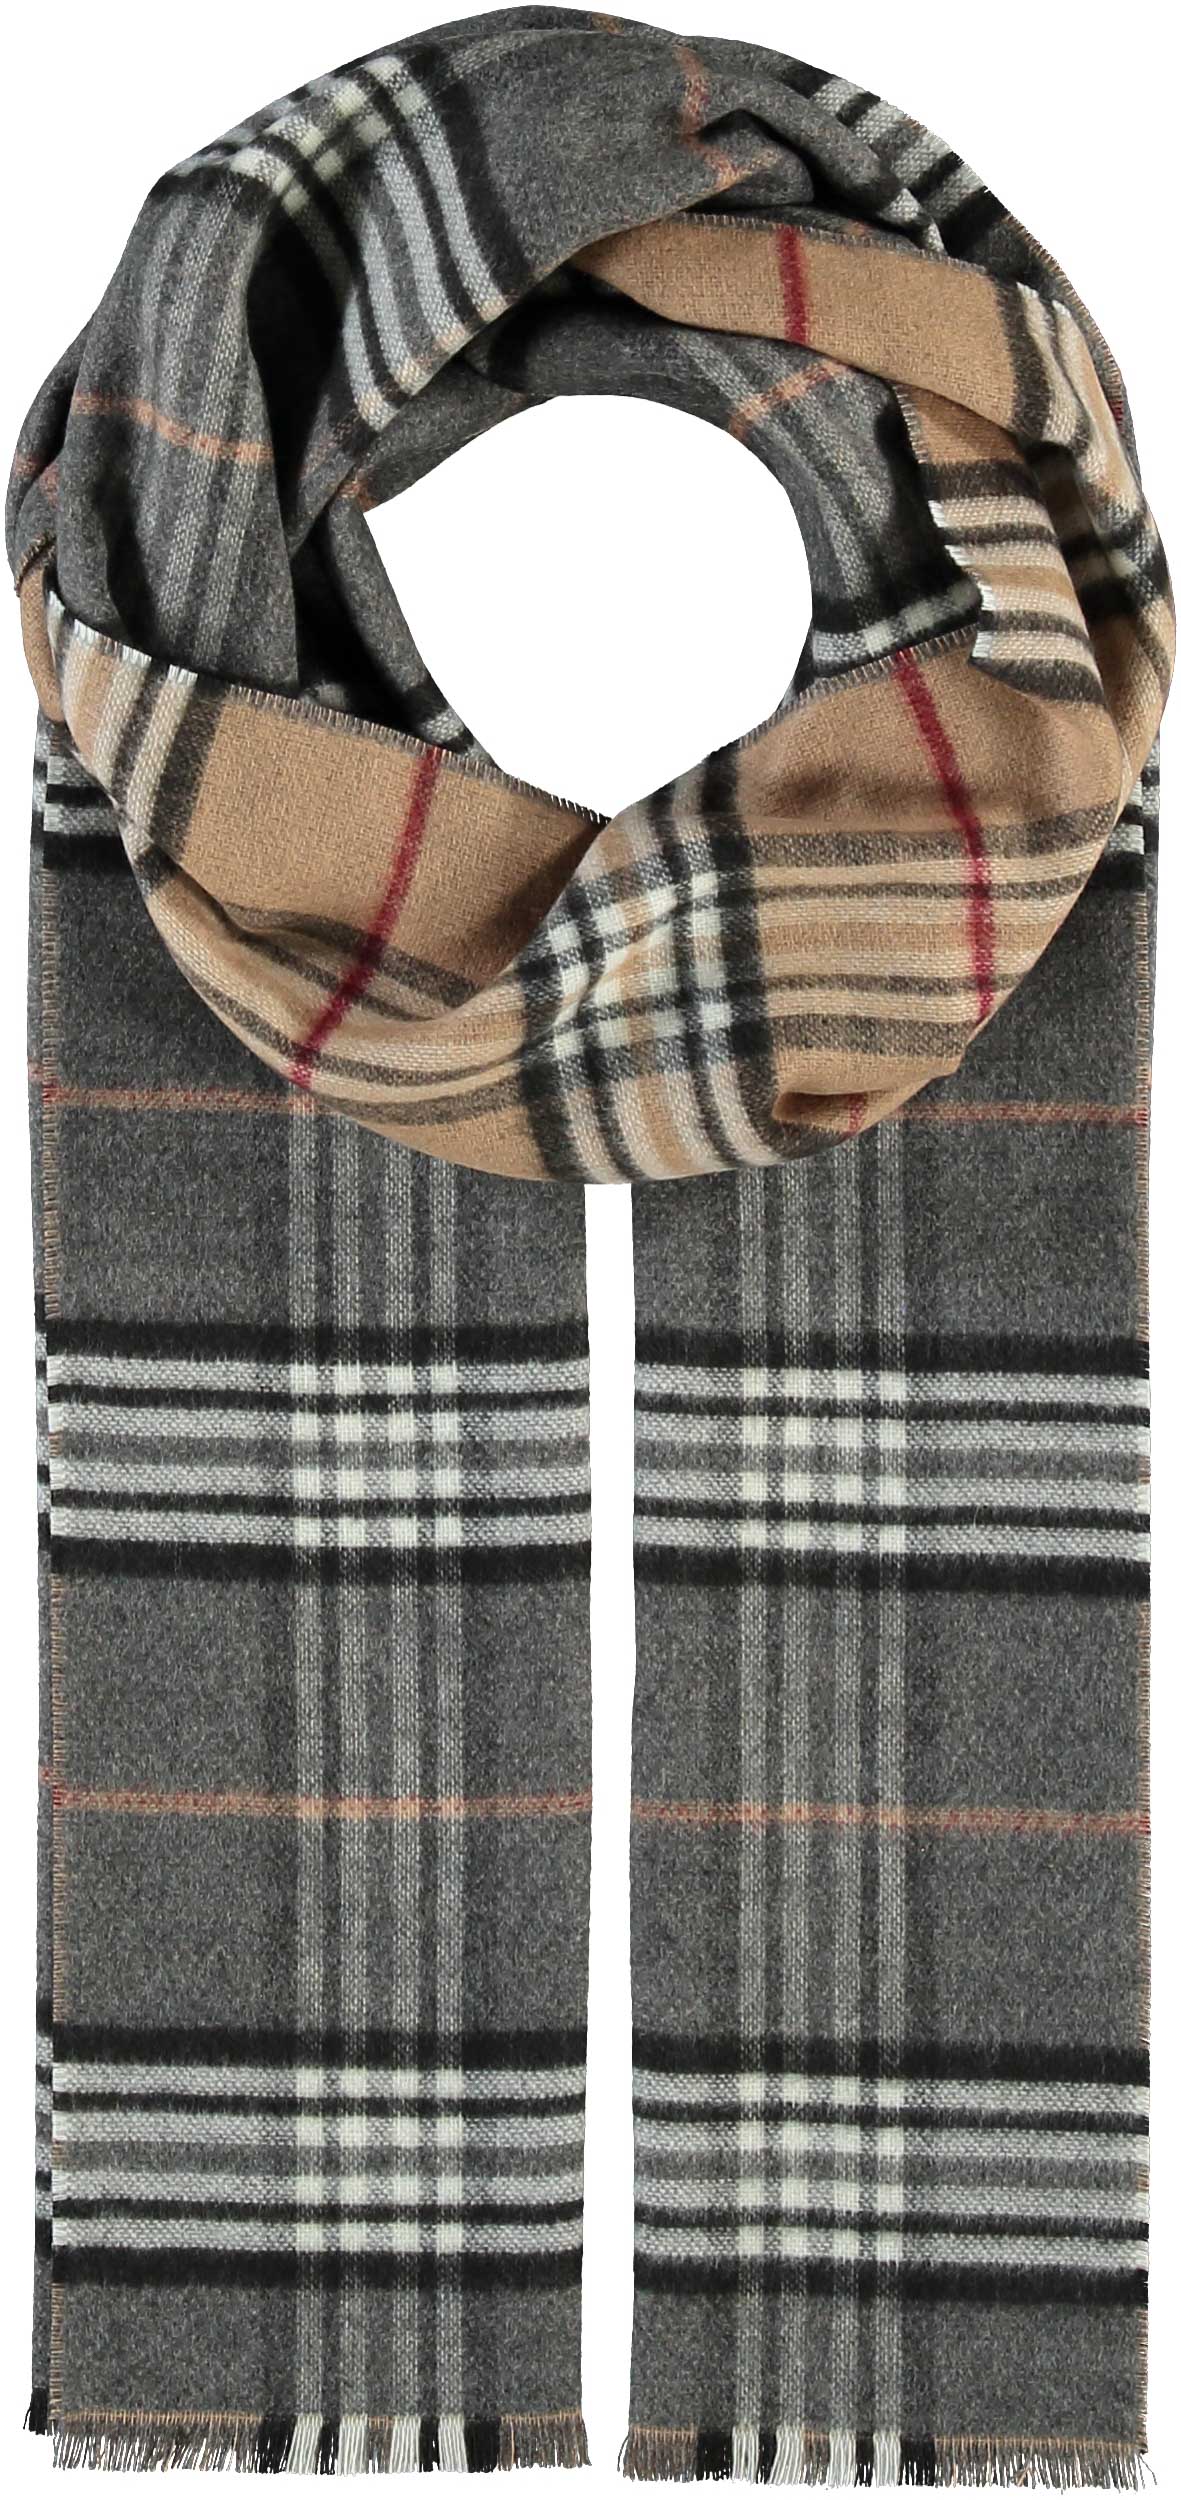 FRAAS - The Scarf Company - FRAAS Plaid Reversible Cashmink® Scarf